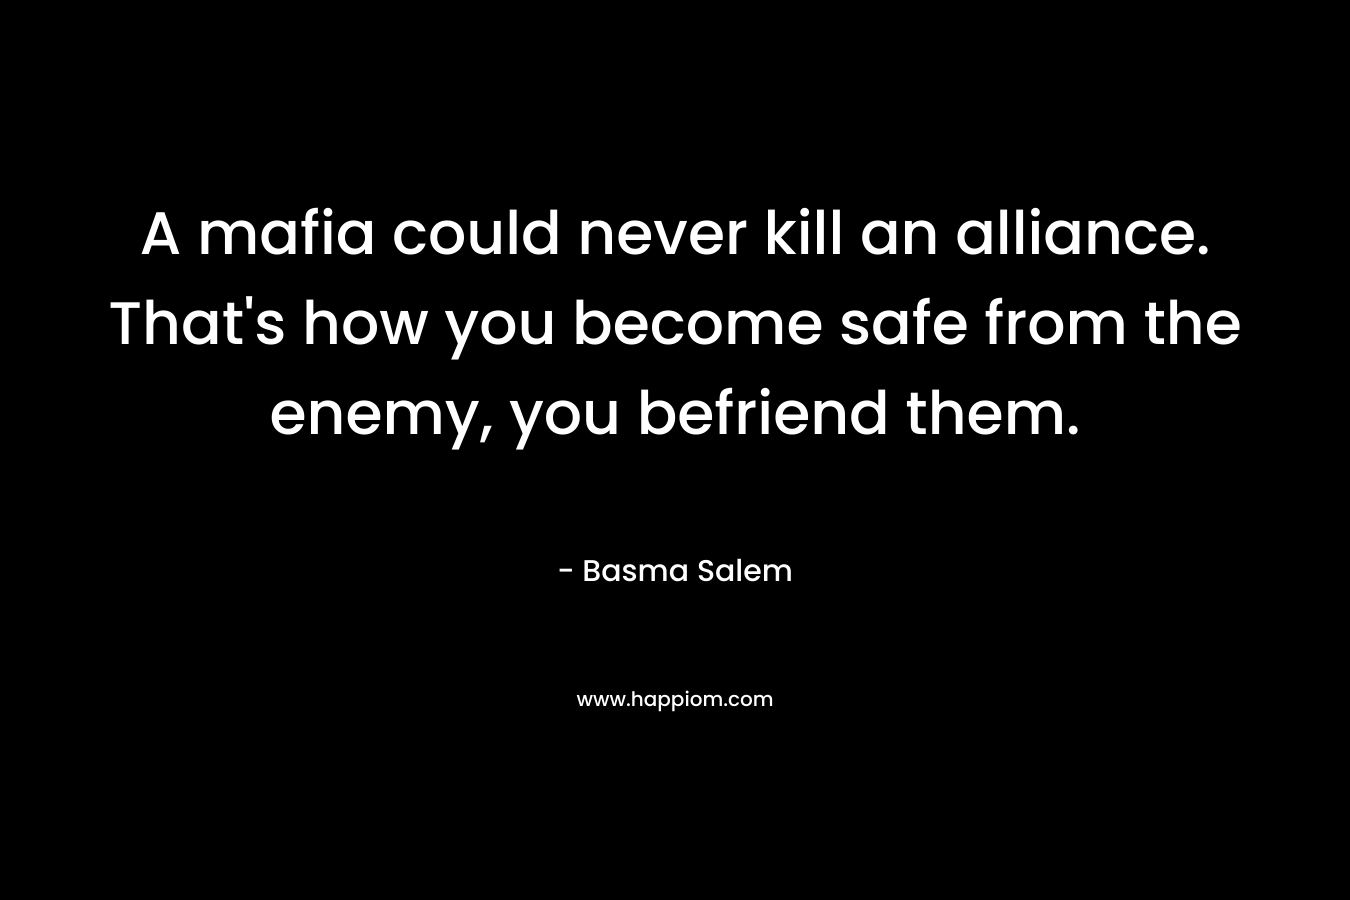 A mafia could never kill an alliance. That's how you become safe from the enemy, you befriend them.